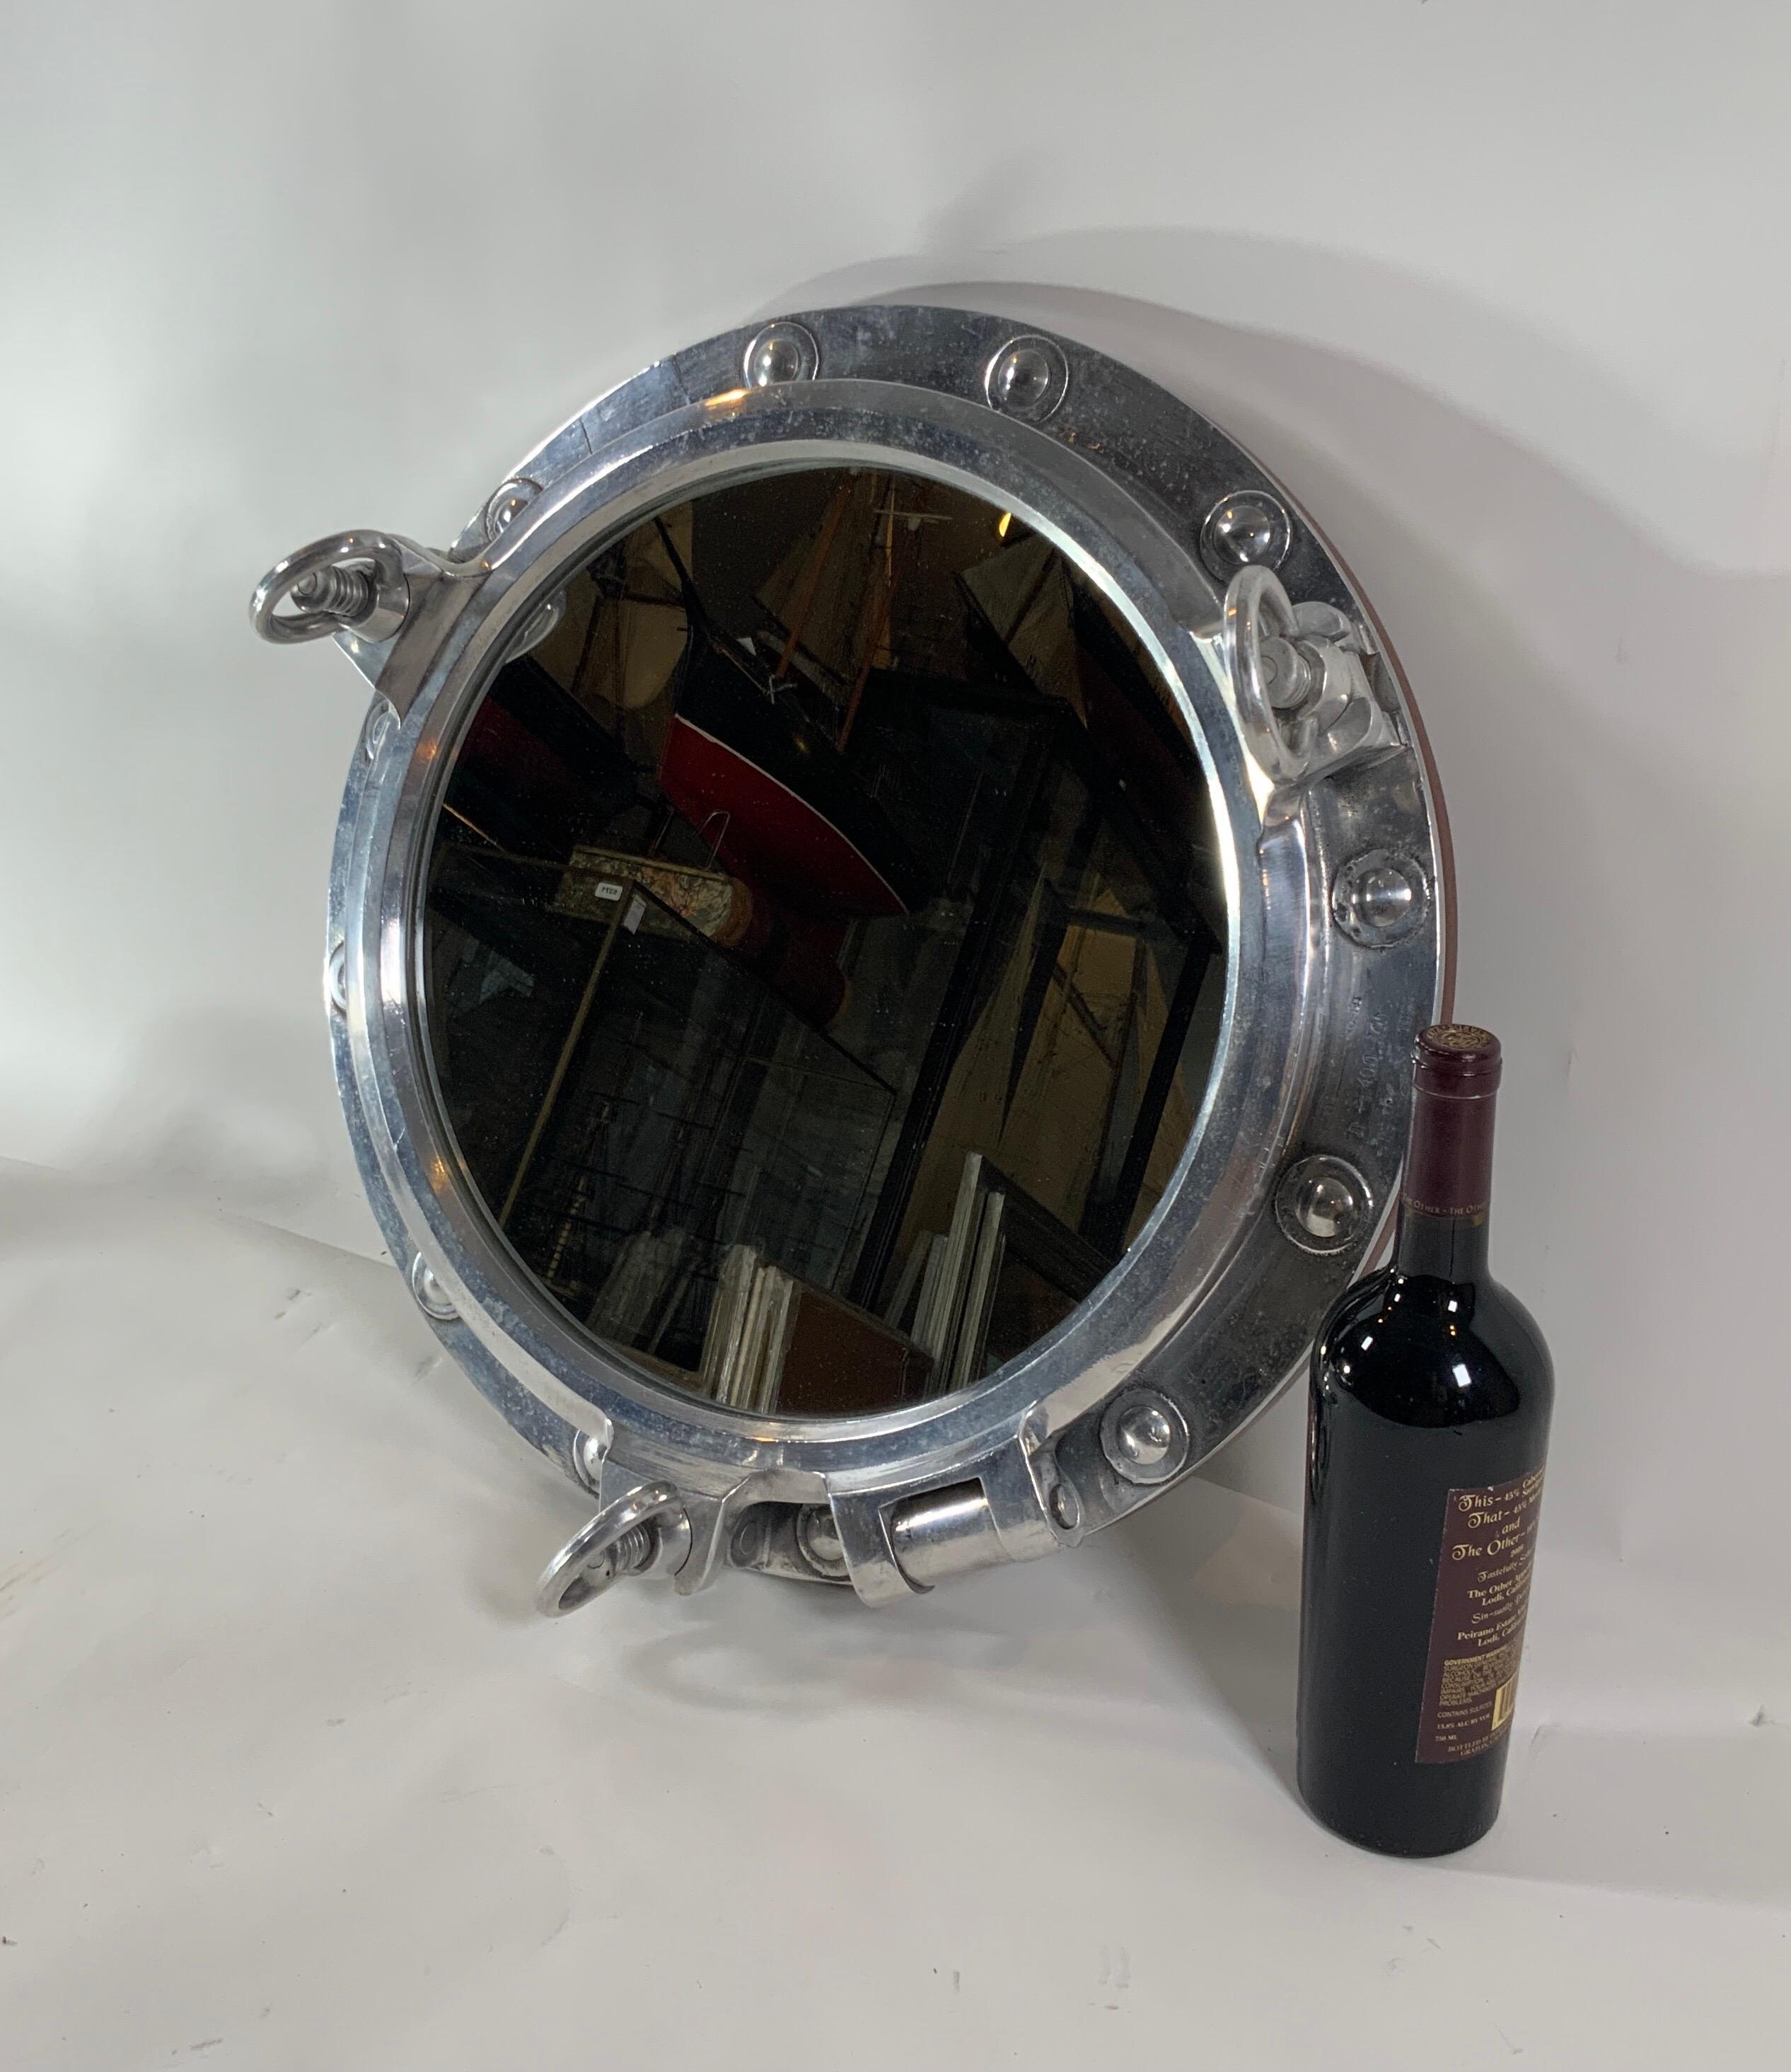 Massive authentic polished aluminum ship's porthole fitted with a glass mirror. Door is hinged and fitted with three dogbolts. This is a large impressive size and scale. The highly polished porthole is also fitted with a teakwood trim ring on the